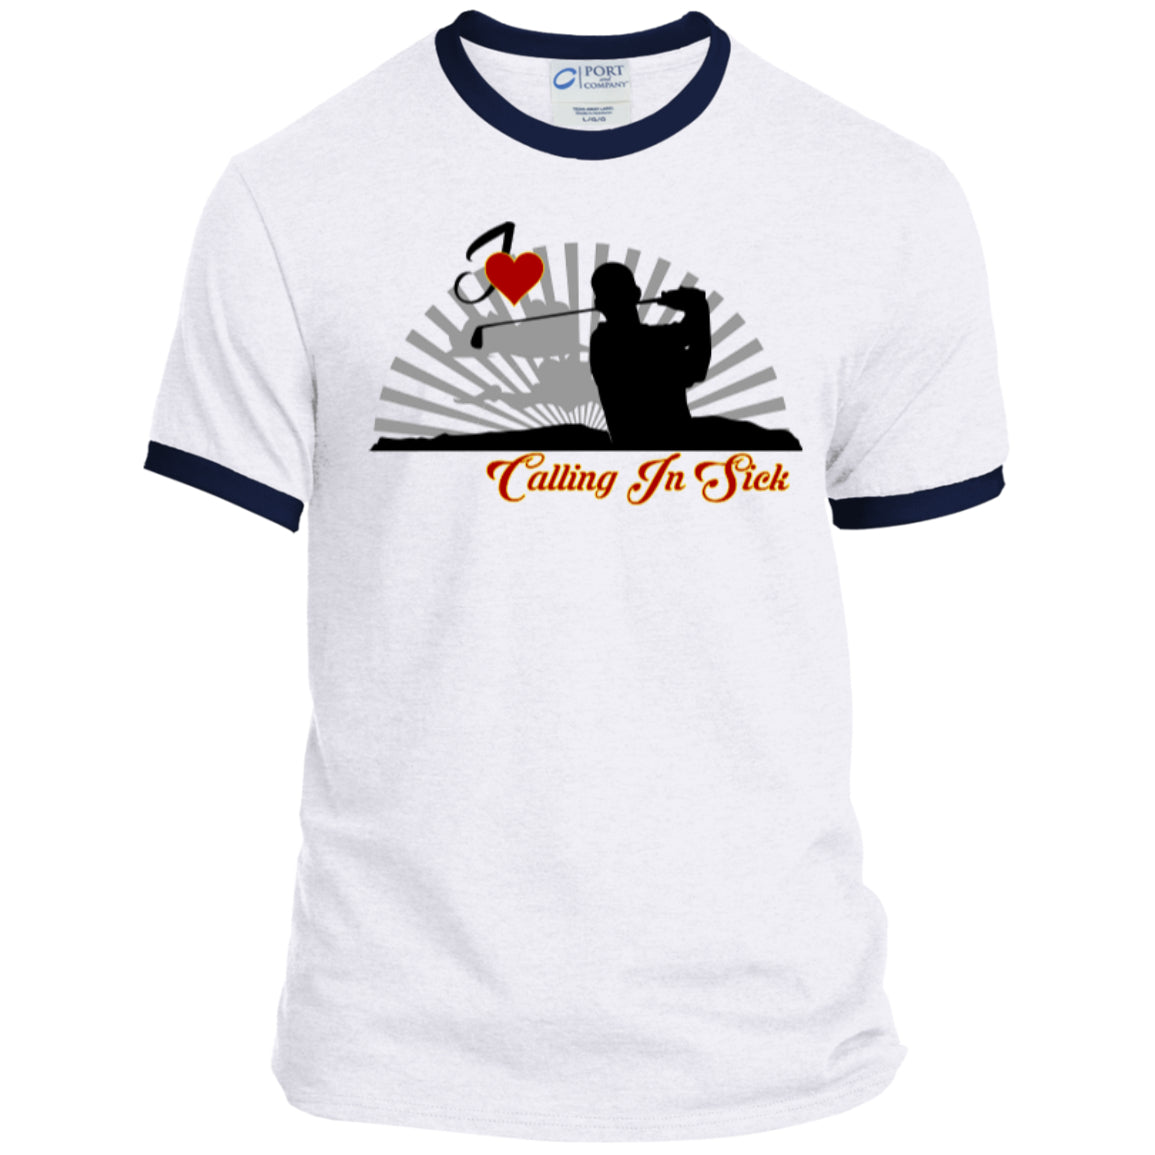 Golf - Love Calling In Sick -Personalized Ringer Tee - GoneBold.gift